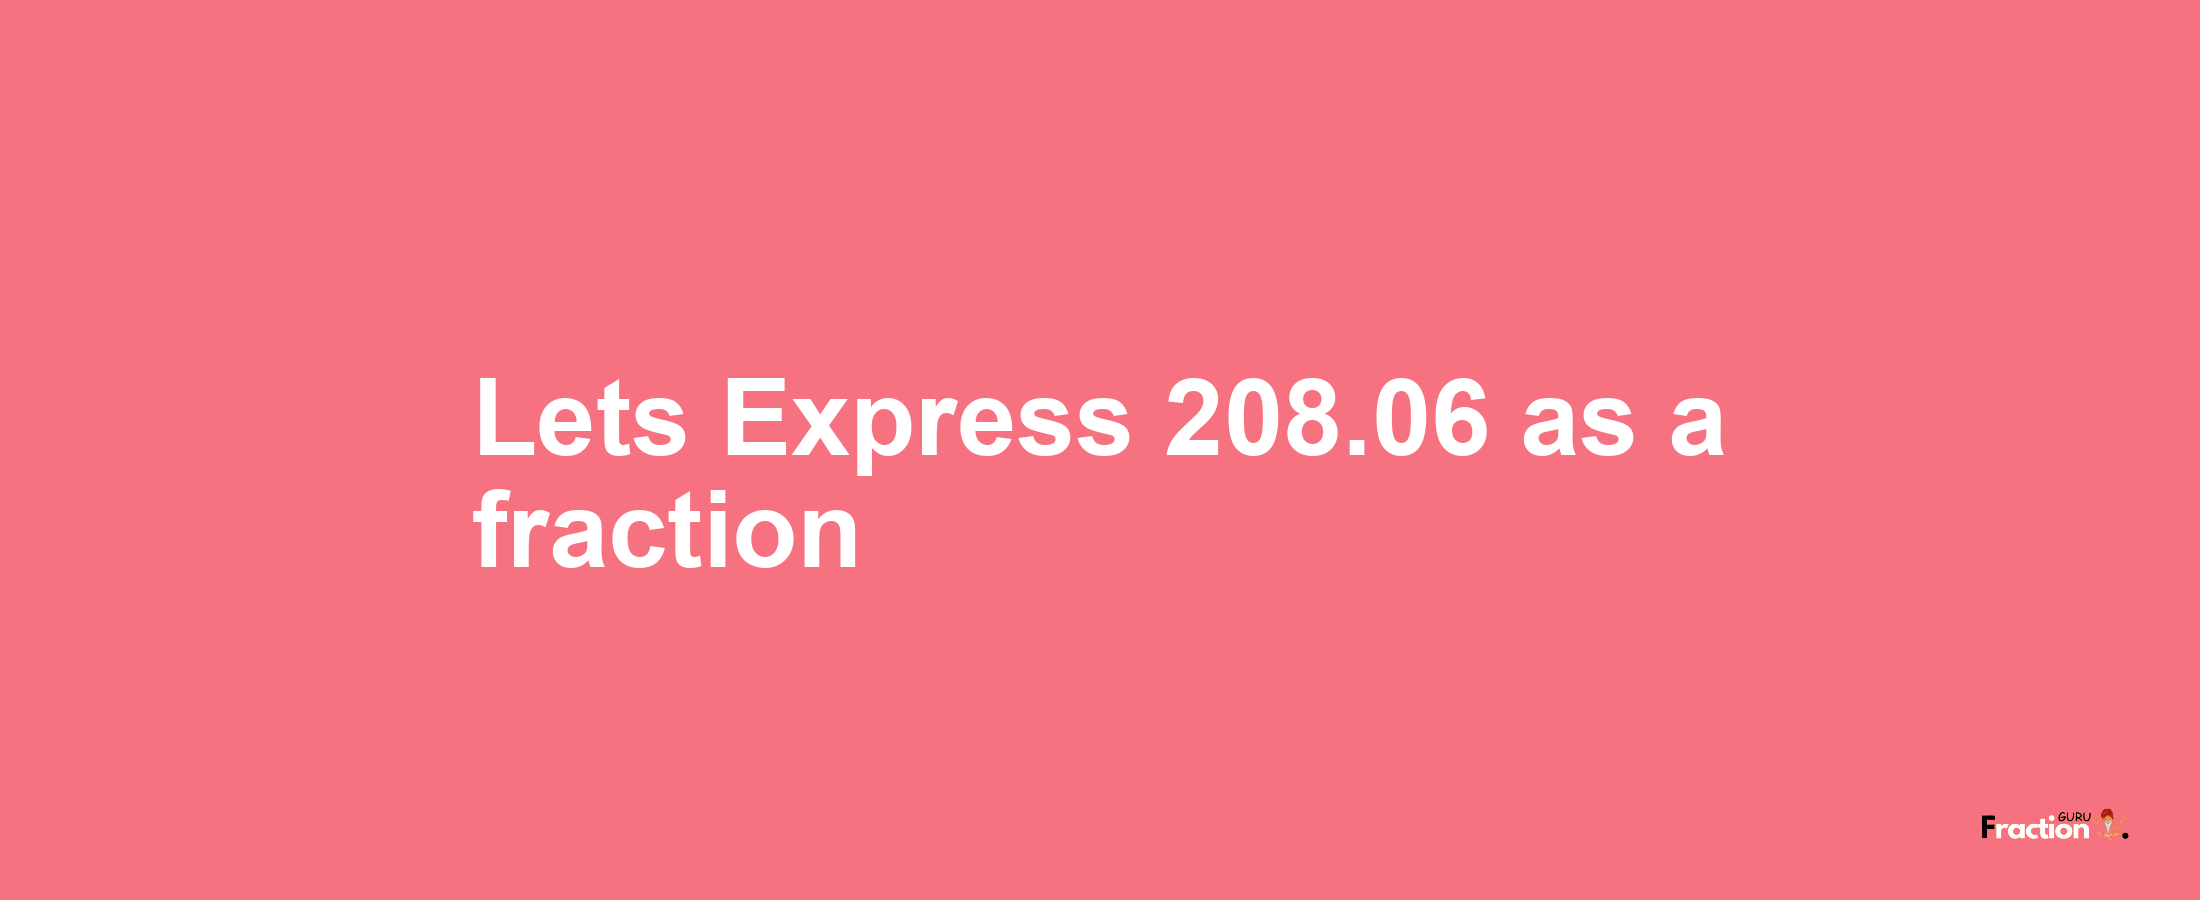 Lets Express 208.06 as afraction